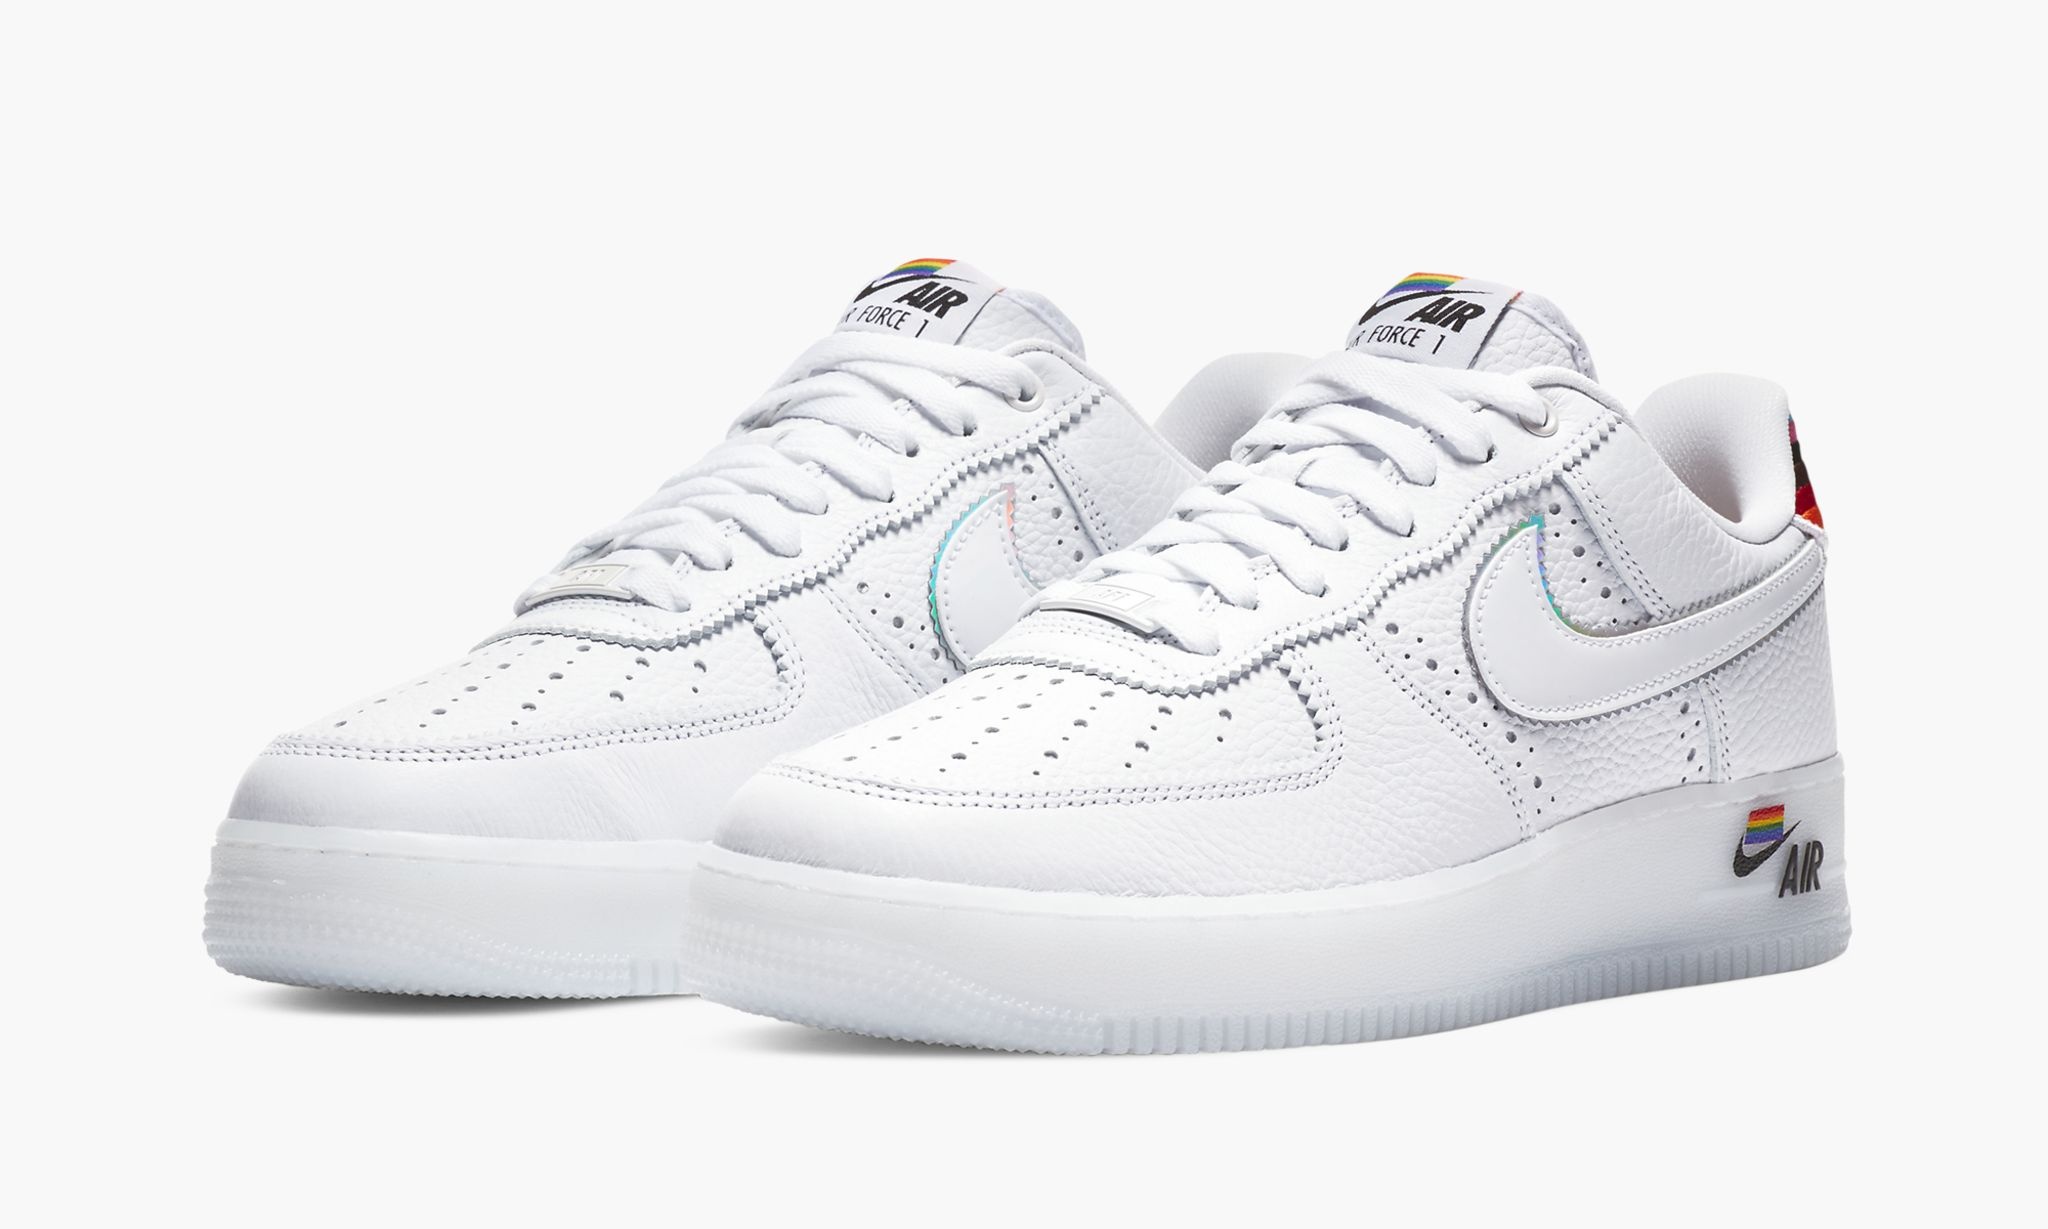 Air Force 1 Low "Be True 2020" - 2